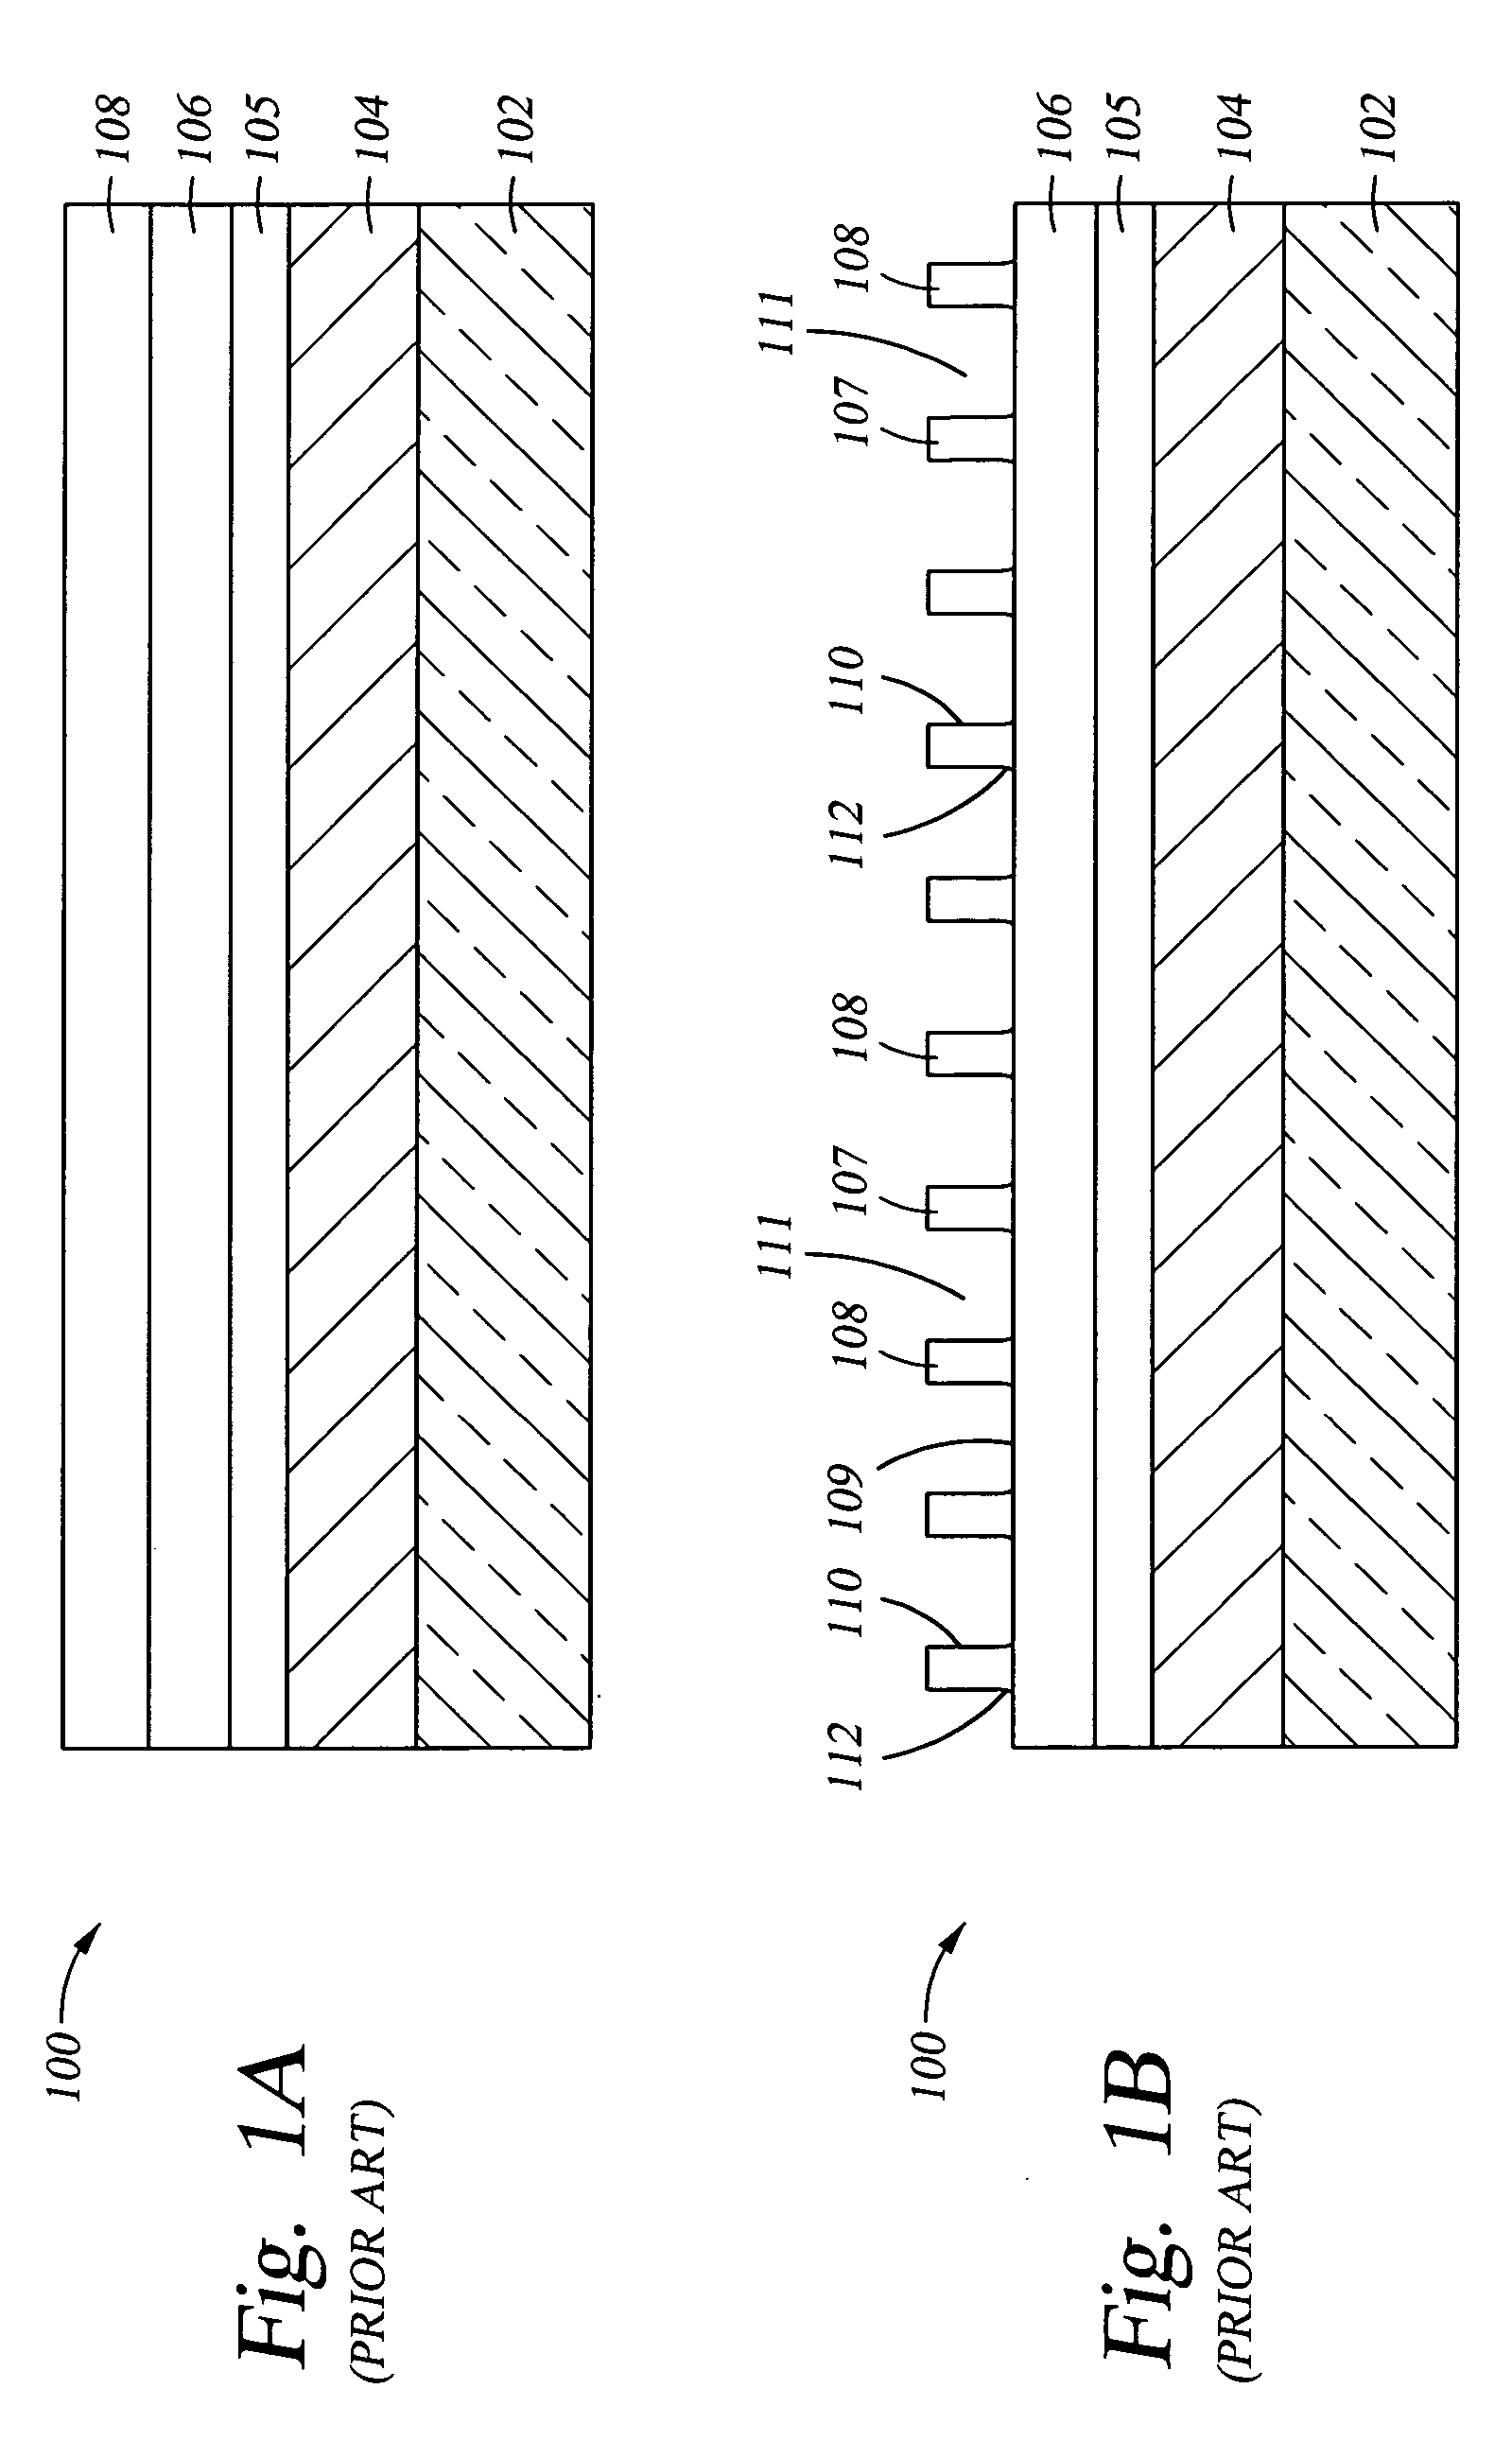 Method of improving the uniformity of a patterned resist on a photomask